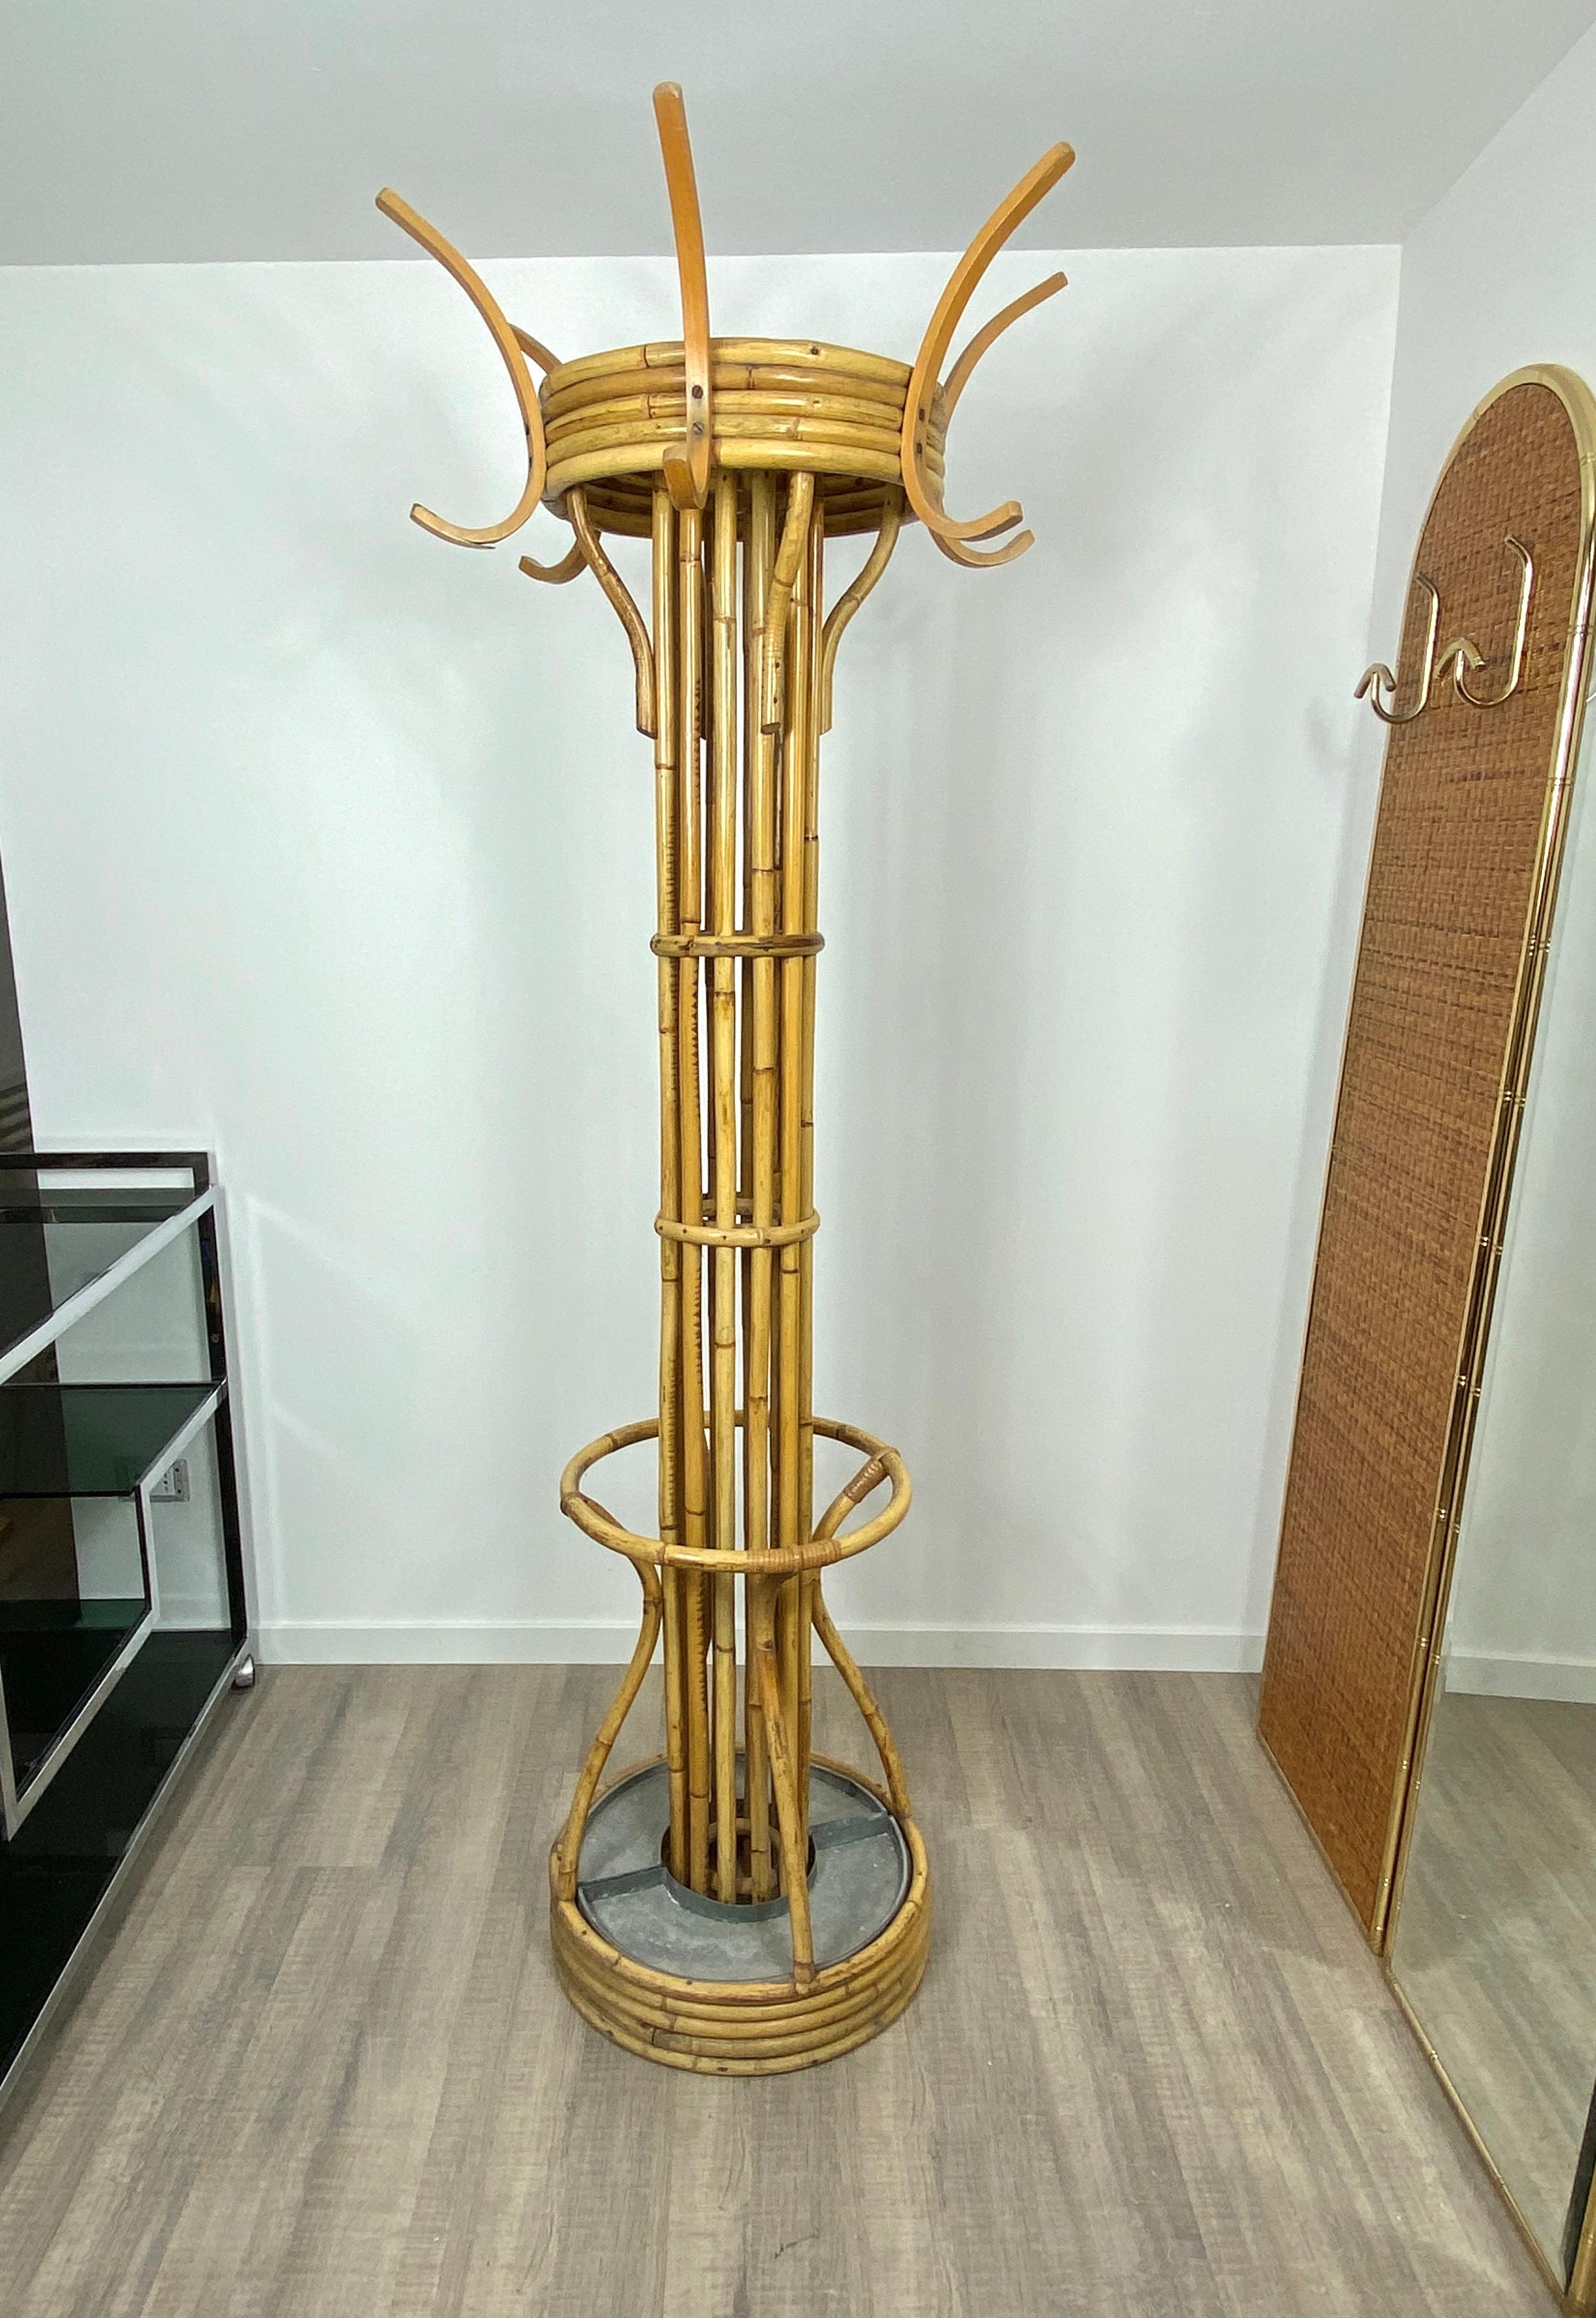 Standing coat rack and umbrella stand in bamboo,
Italy, circa 1960. As shown in the photos, the date 